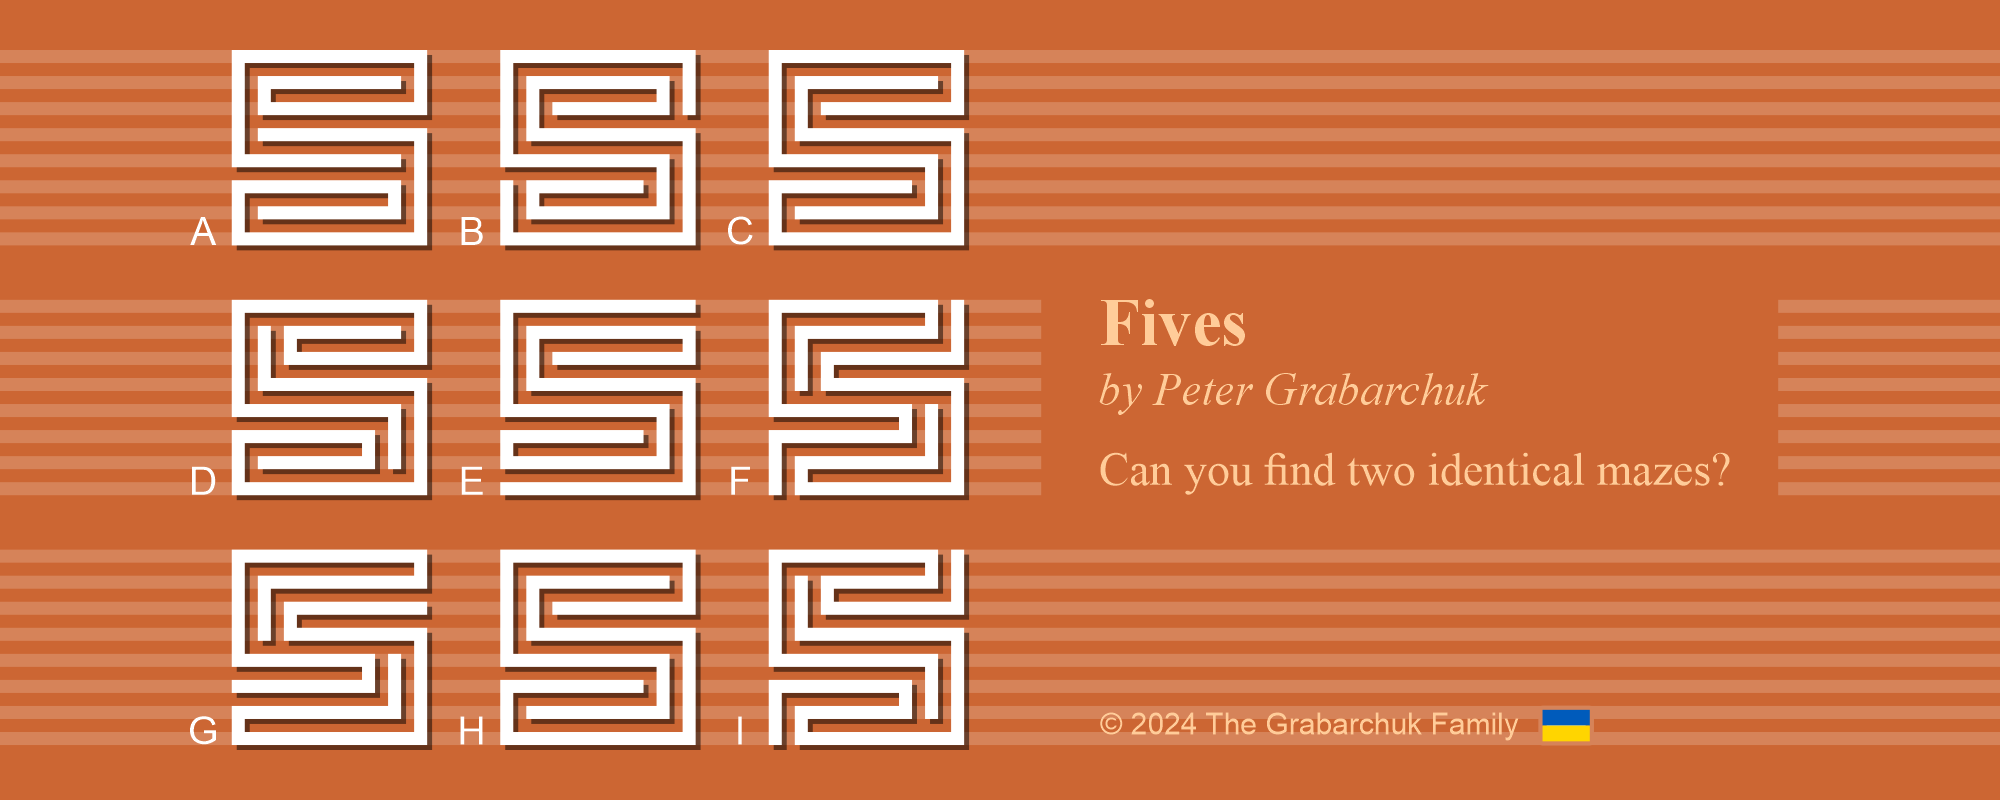 Fives by Peter Grabarchuk